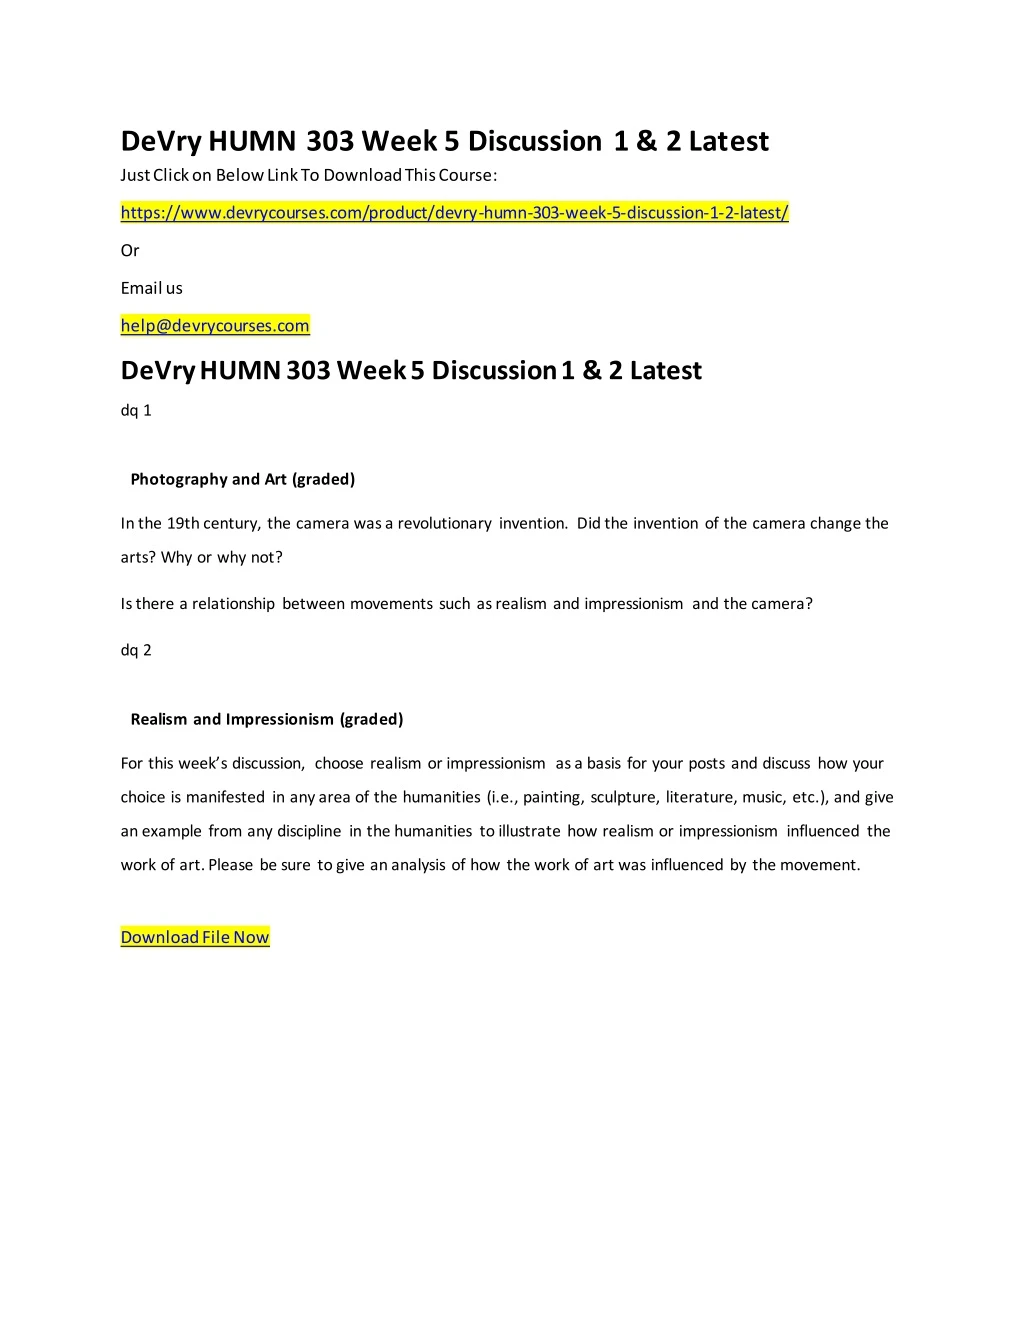 devry humn 303 week 5 discussion 1 2 latest just